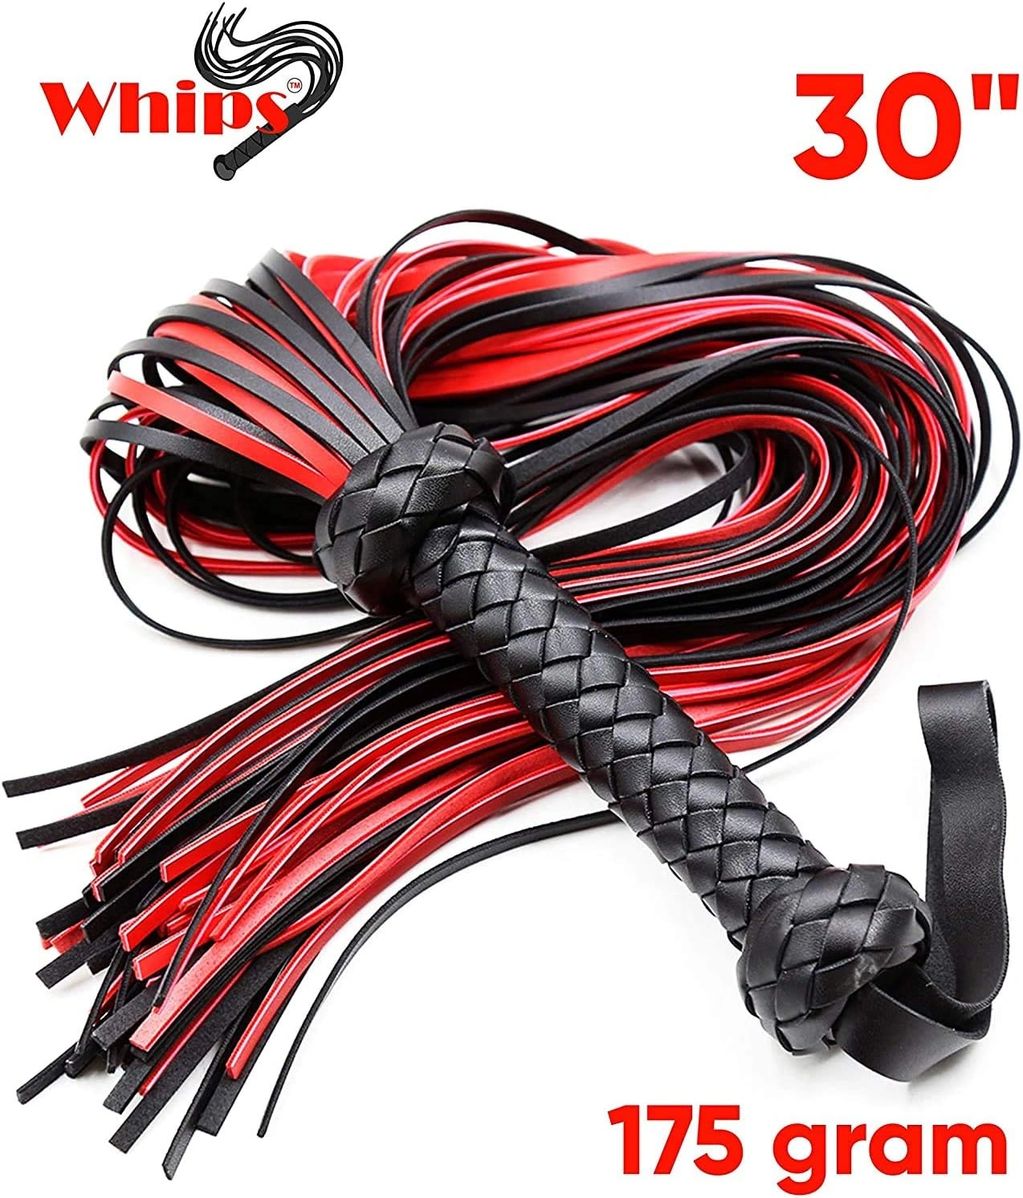 Whip Horse Red Leather 30" BDSM